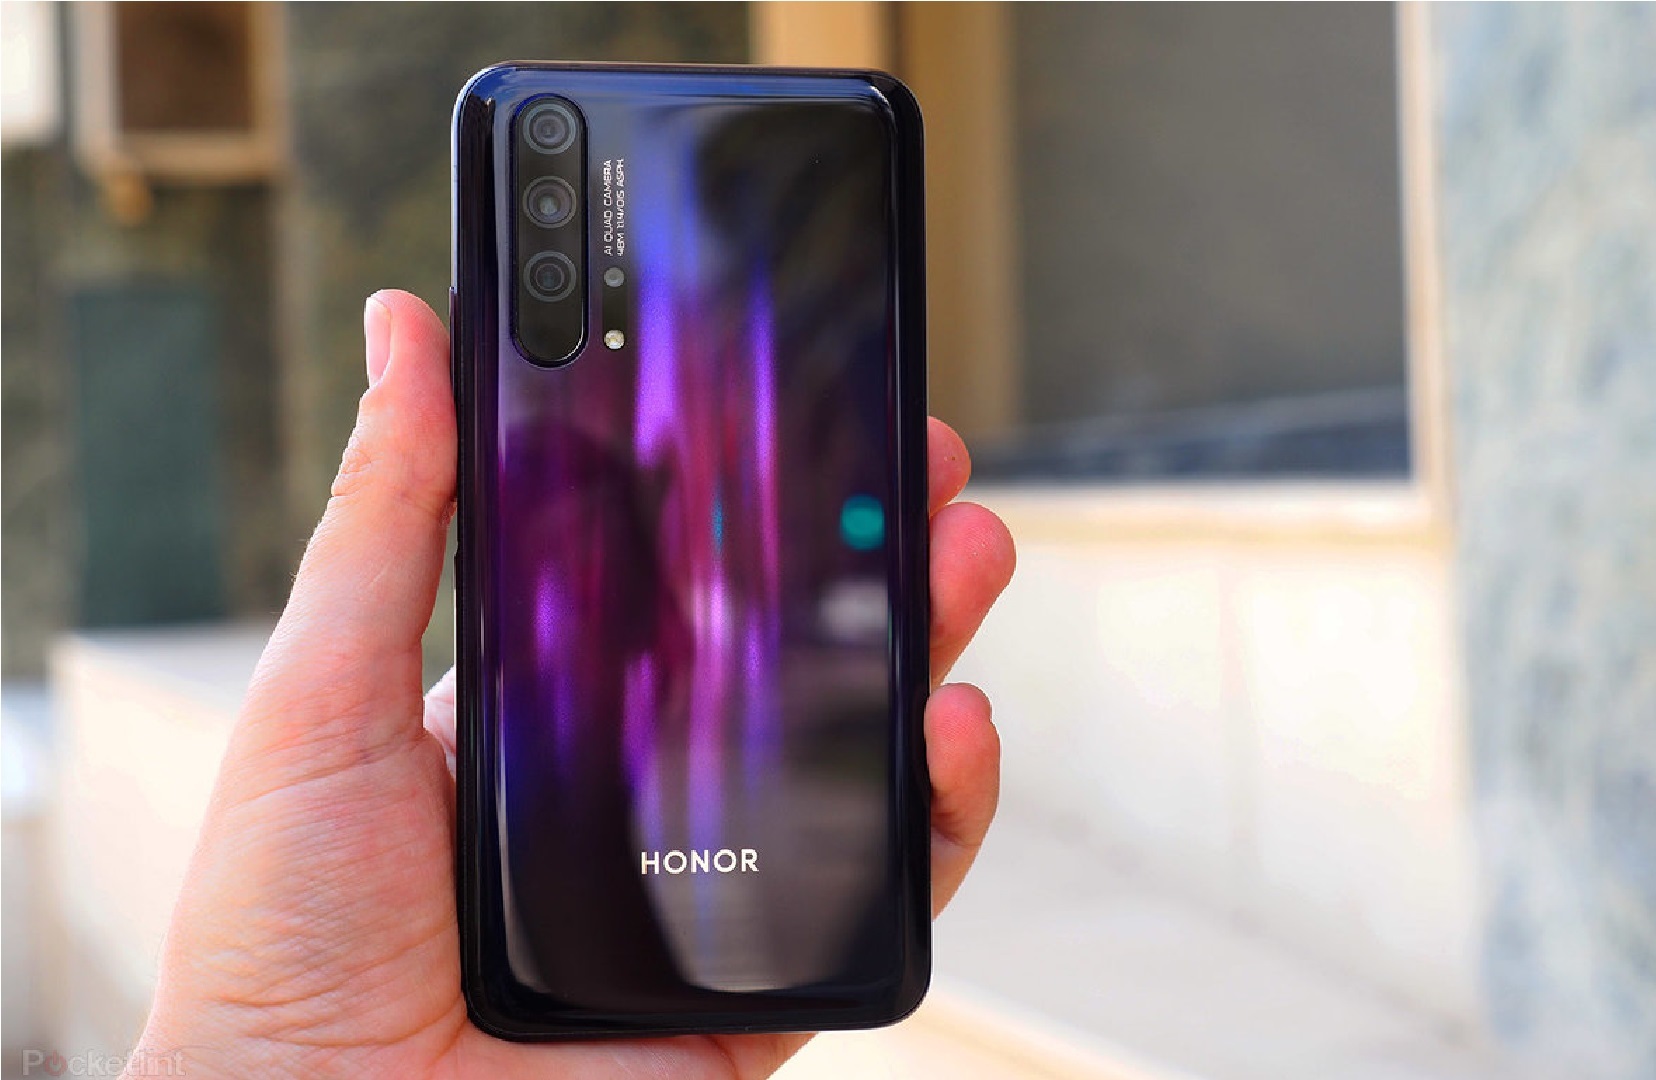 148077 phones review honor 20 pro review lead image1 0ghzldtf9d